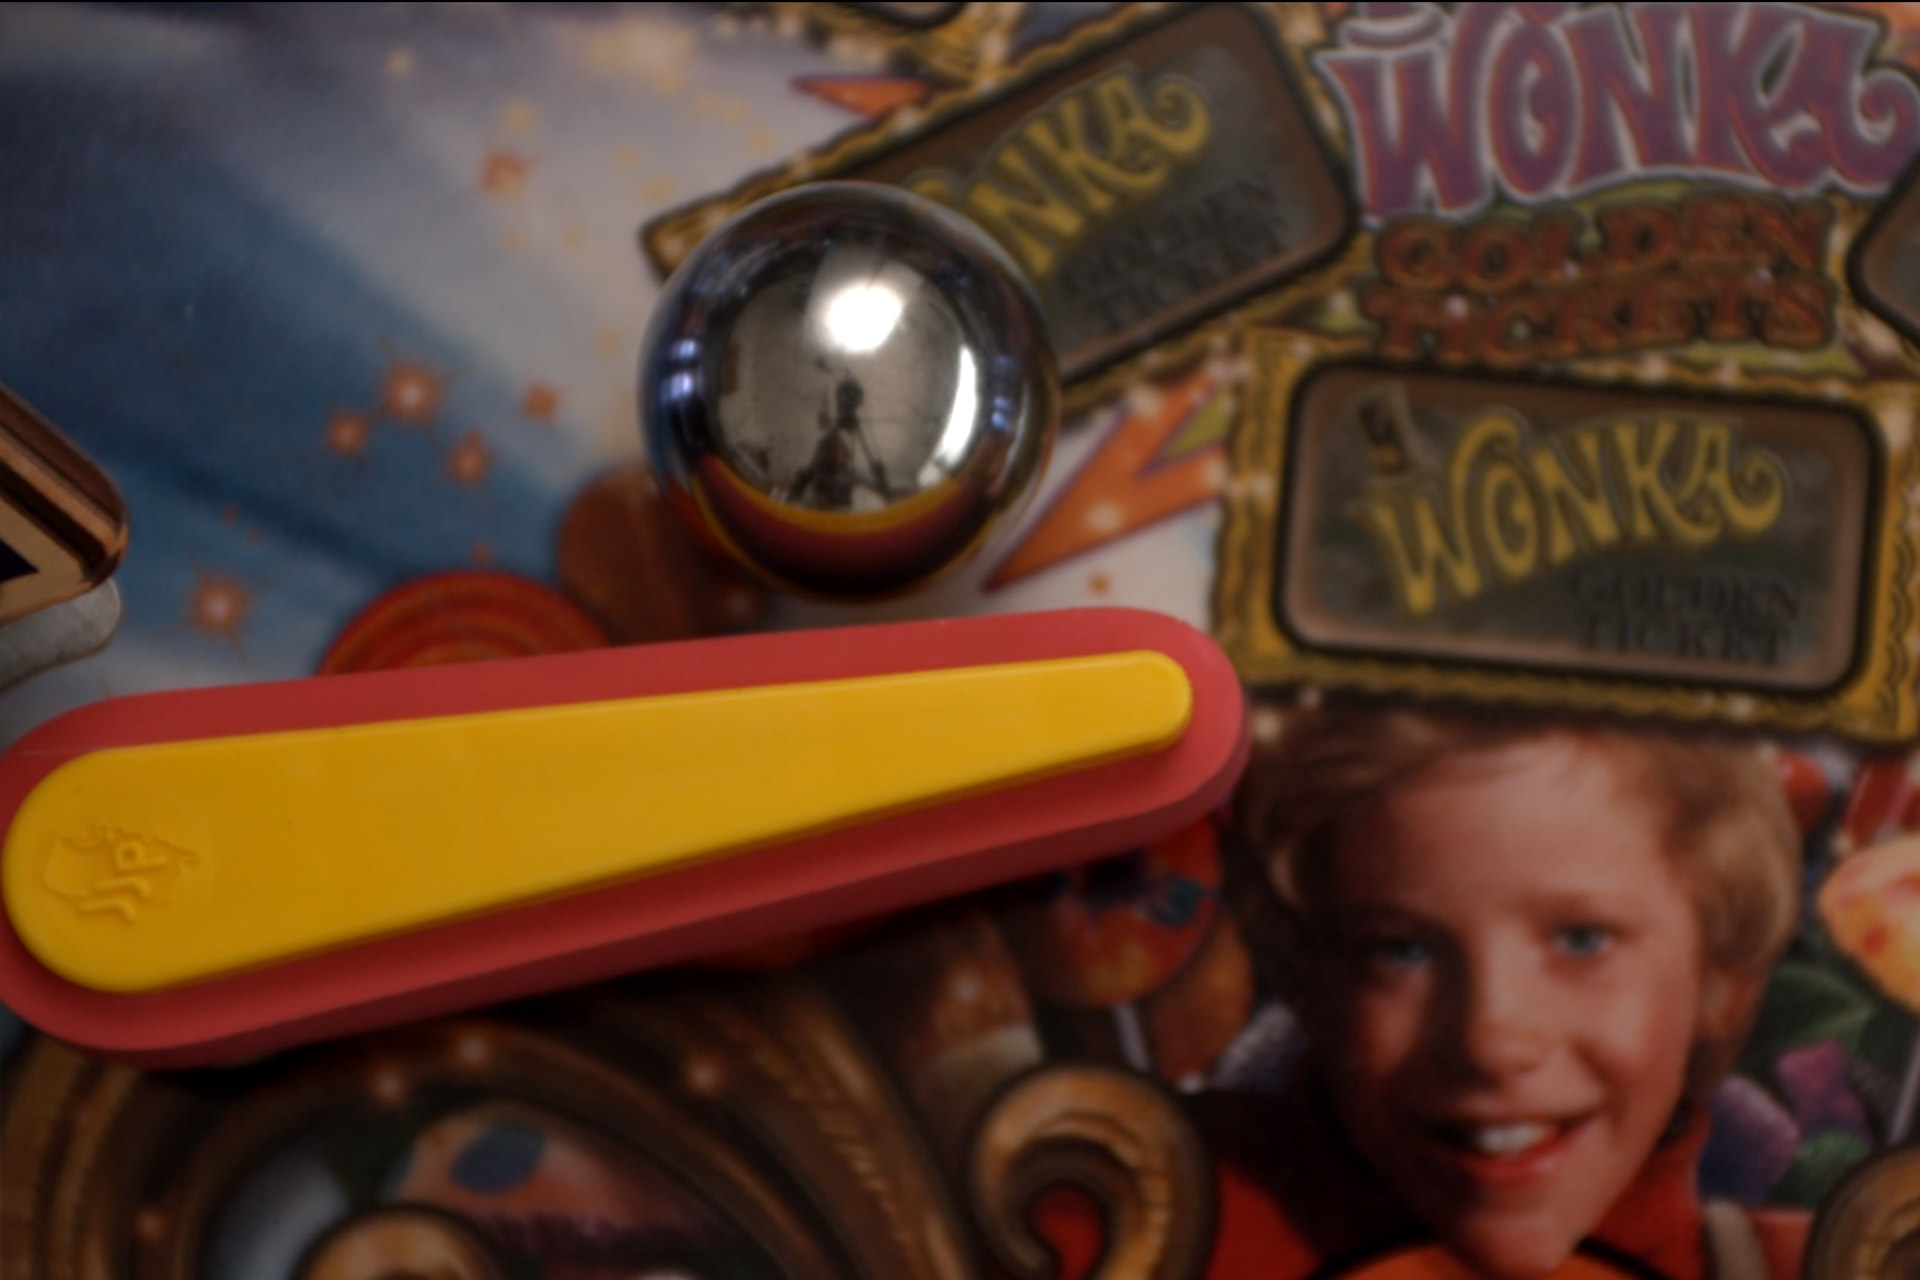 How a Pinball Machine works in Slow Motion - The Slow Mo Guys 